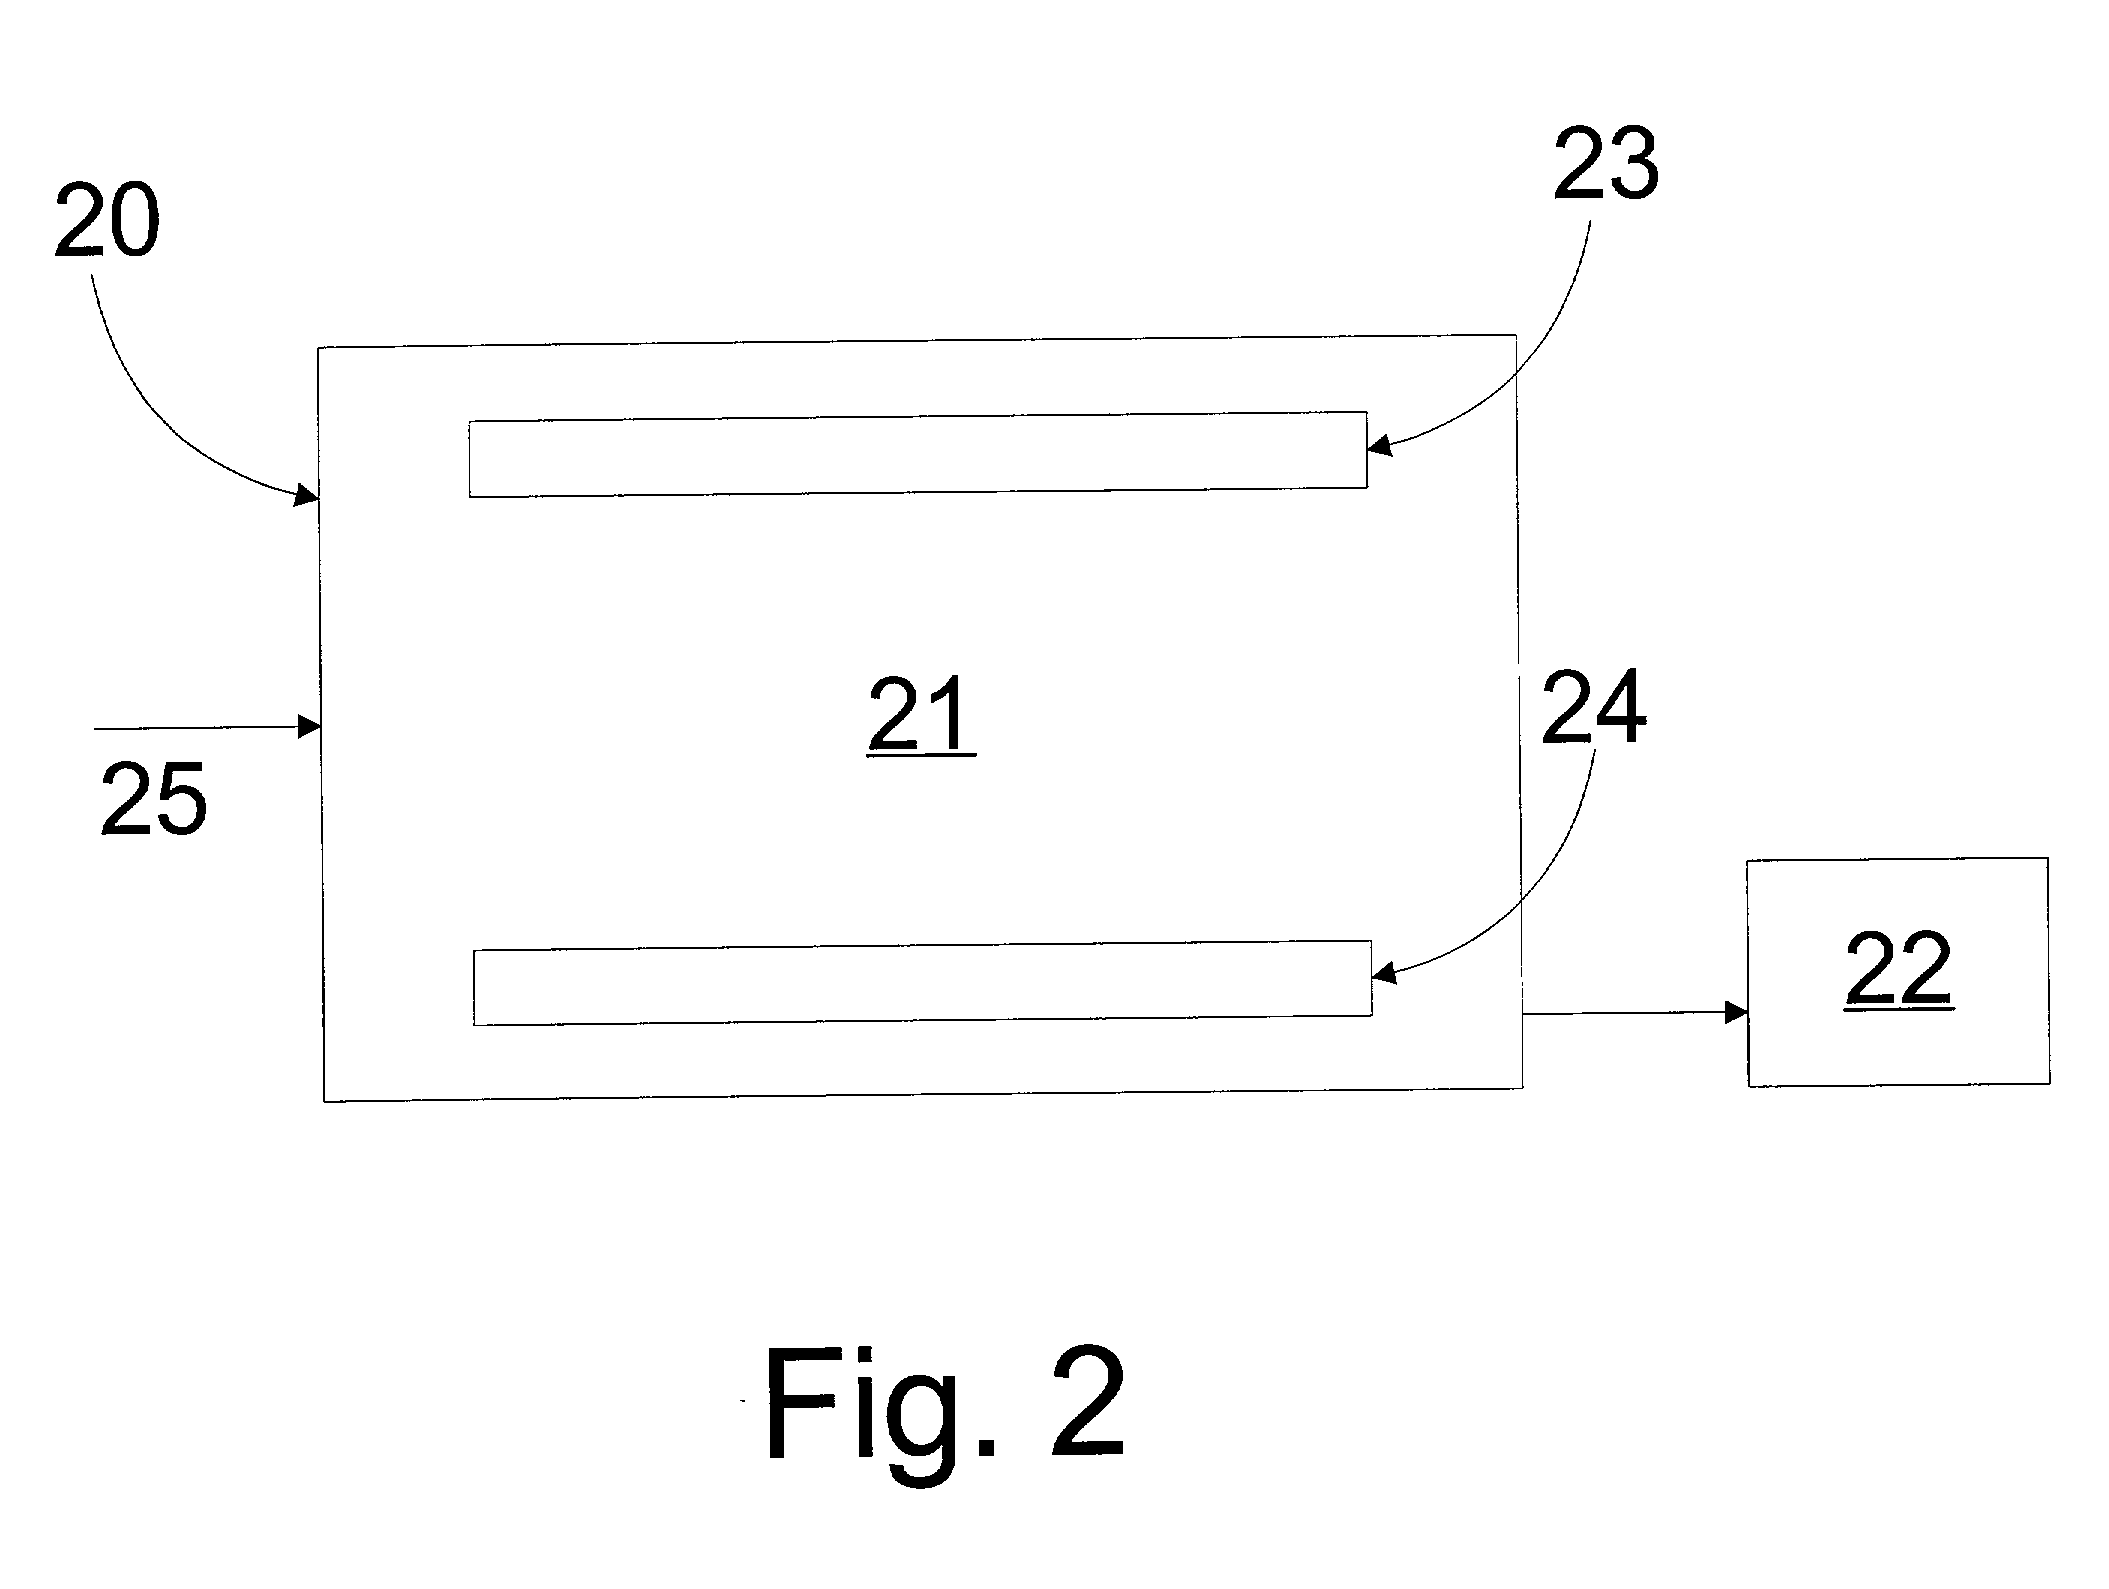 Methods for surface modification